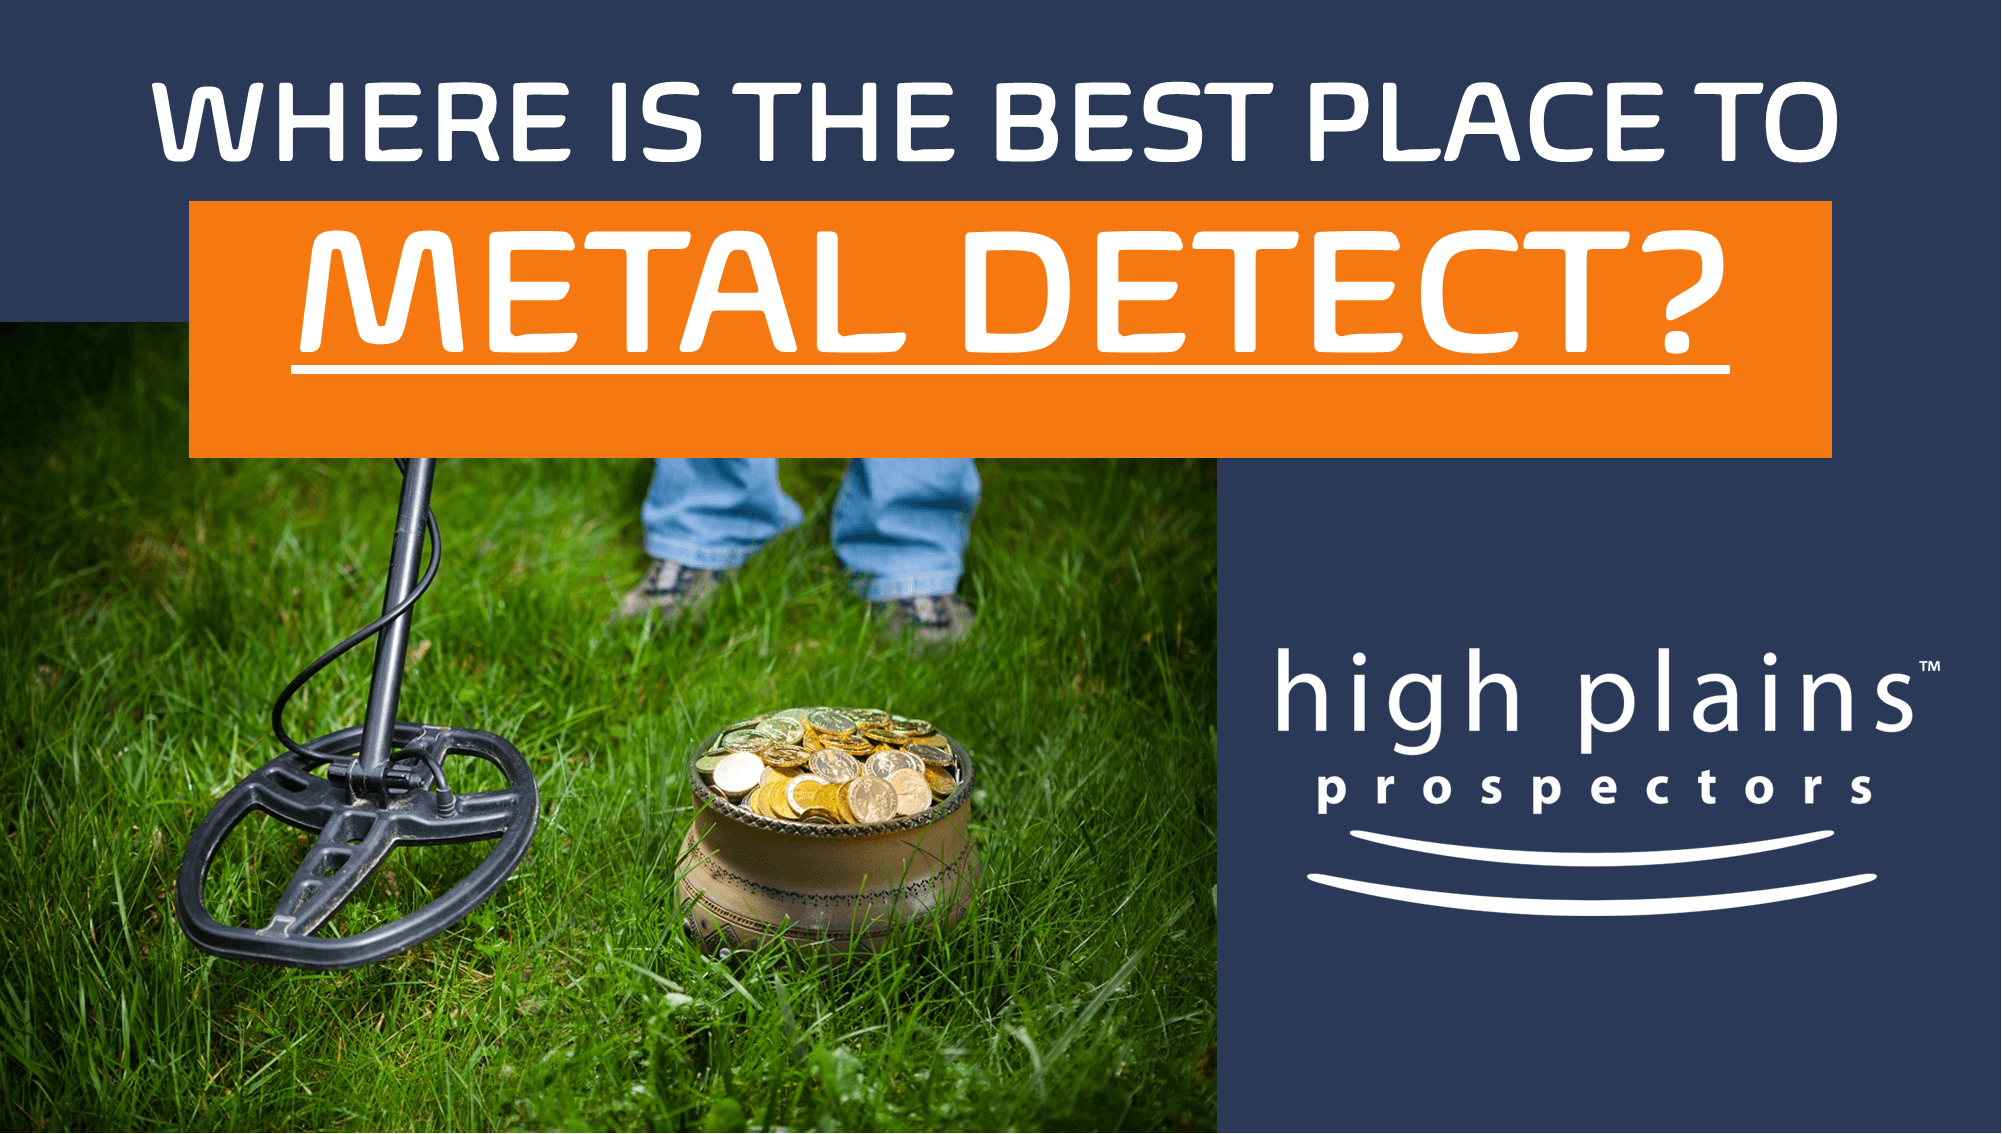 FAQ:  Where is the best place to metal detect?